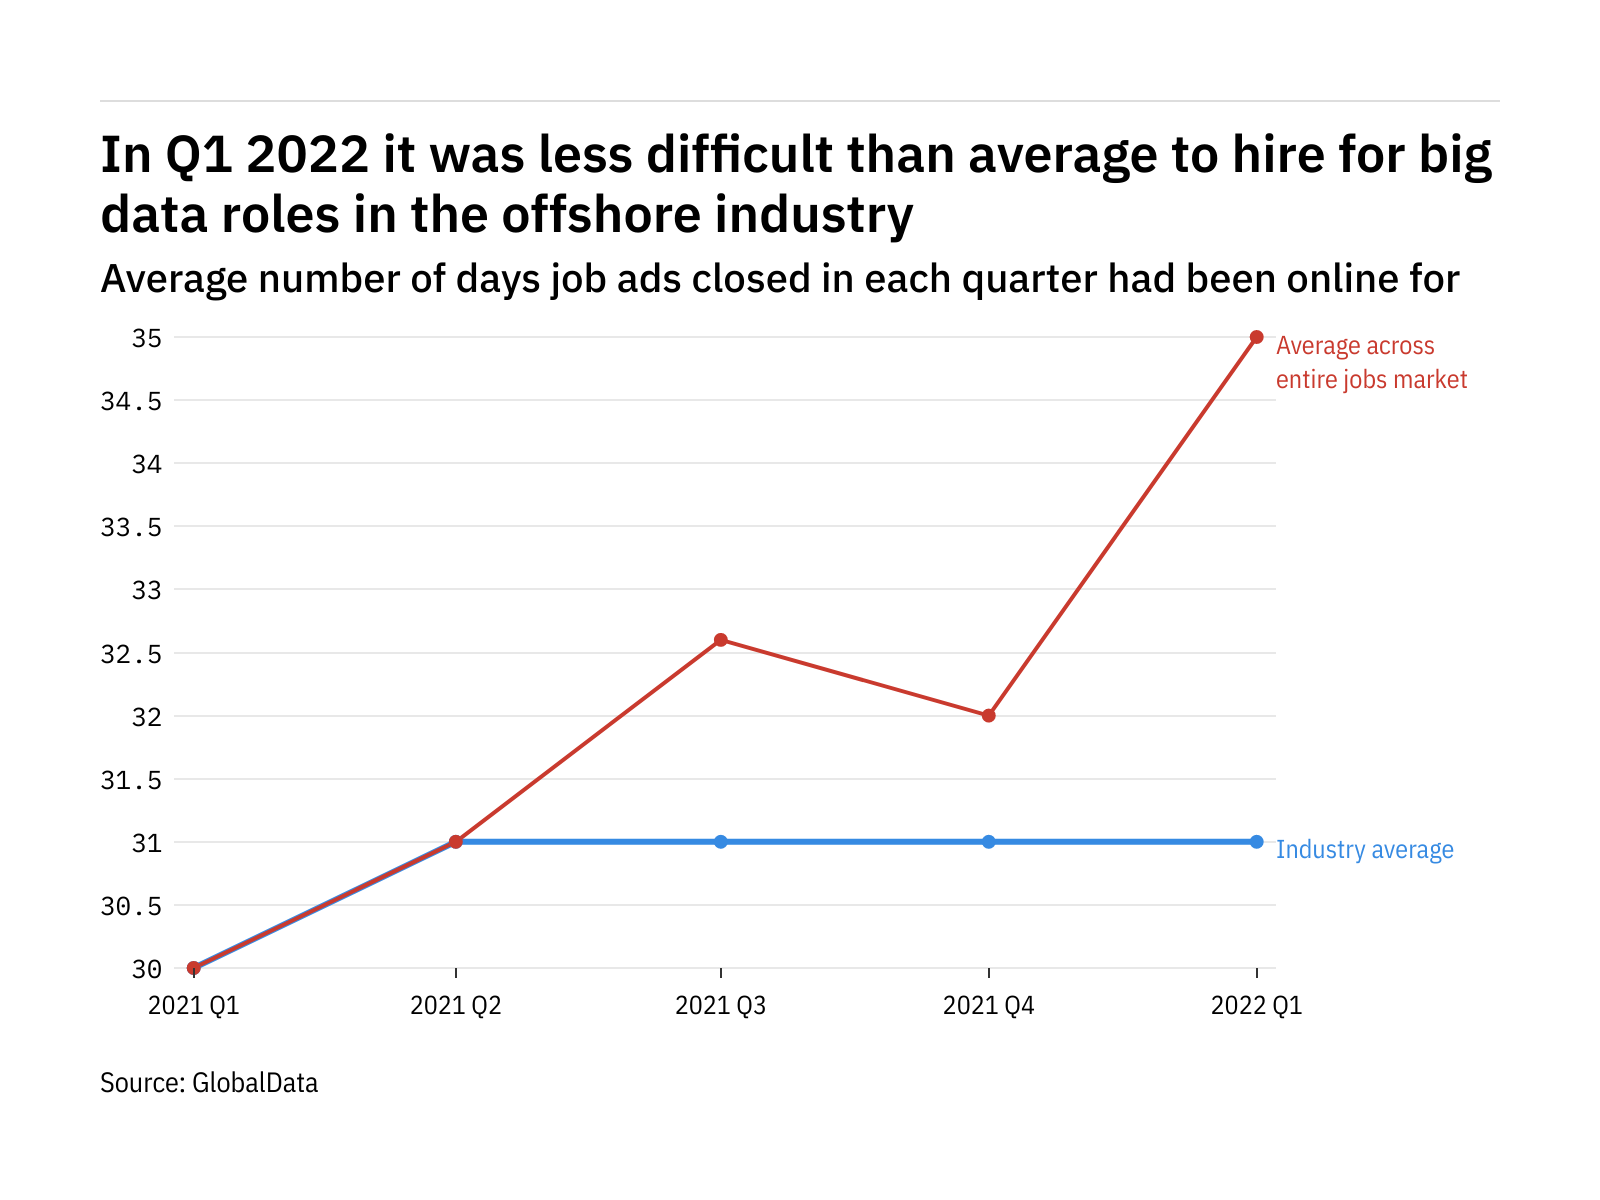 The offshore industry found it harder to fill big data vacancies in Q1 2022